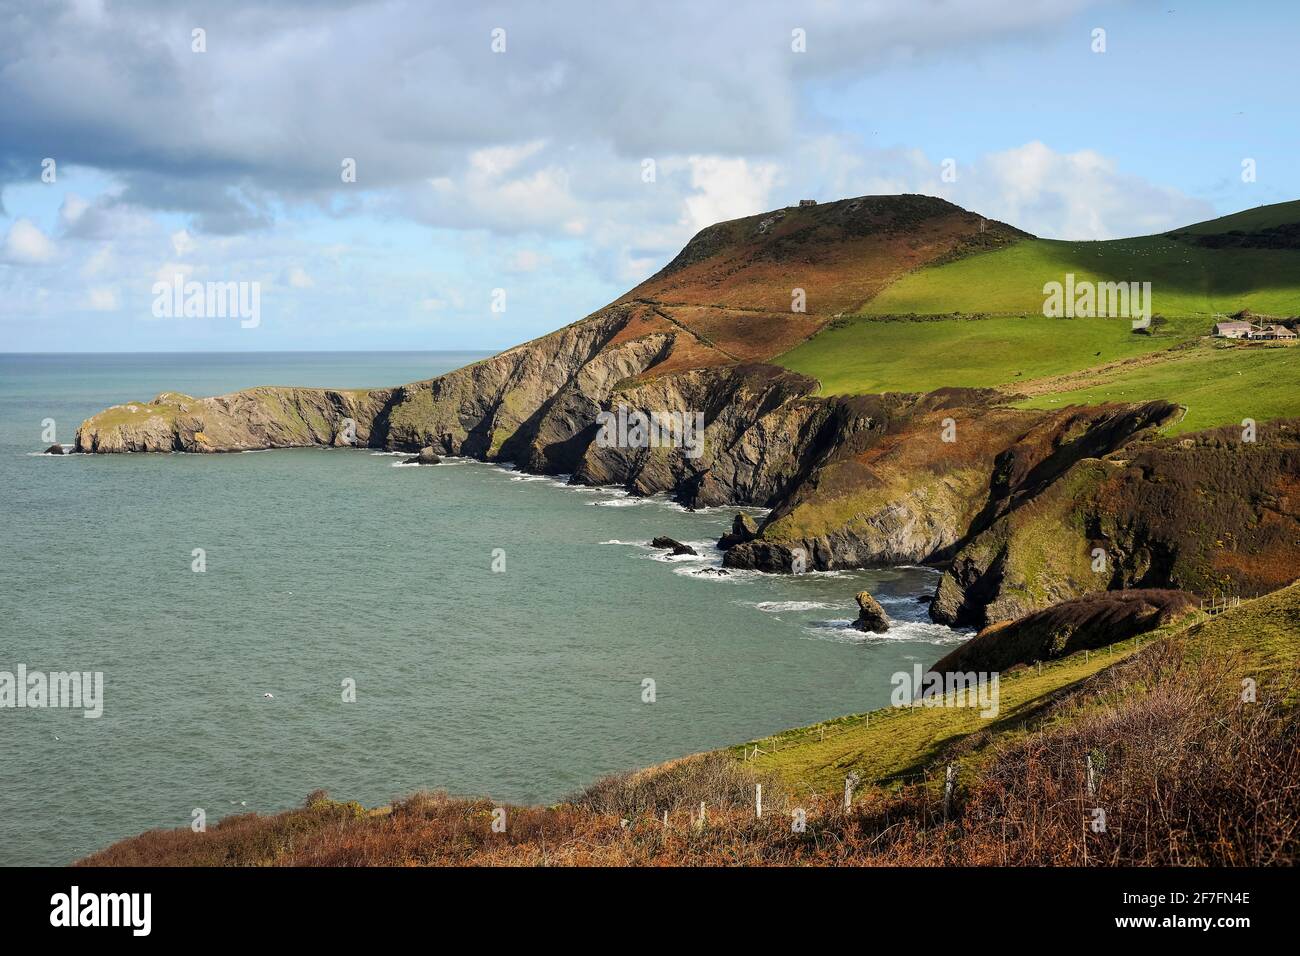 Lochtyn Peninsula's eroded cliffs at Llangrannog, The Giant Bica's rock tooth is lower right, Lochtyn, Ceredigion, Wales, United Kingdom, Europe Stock Photo